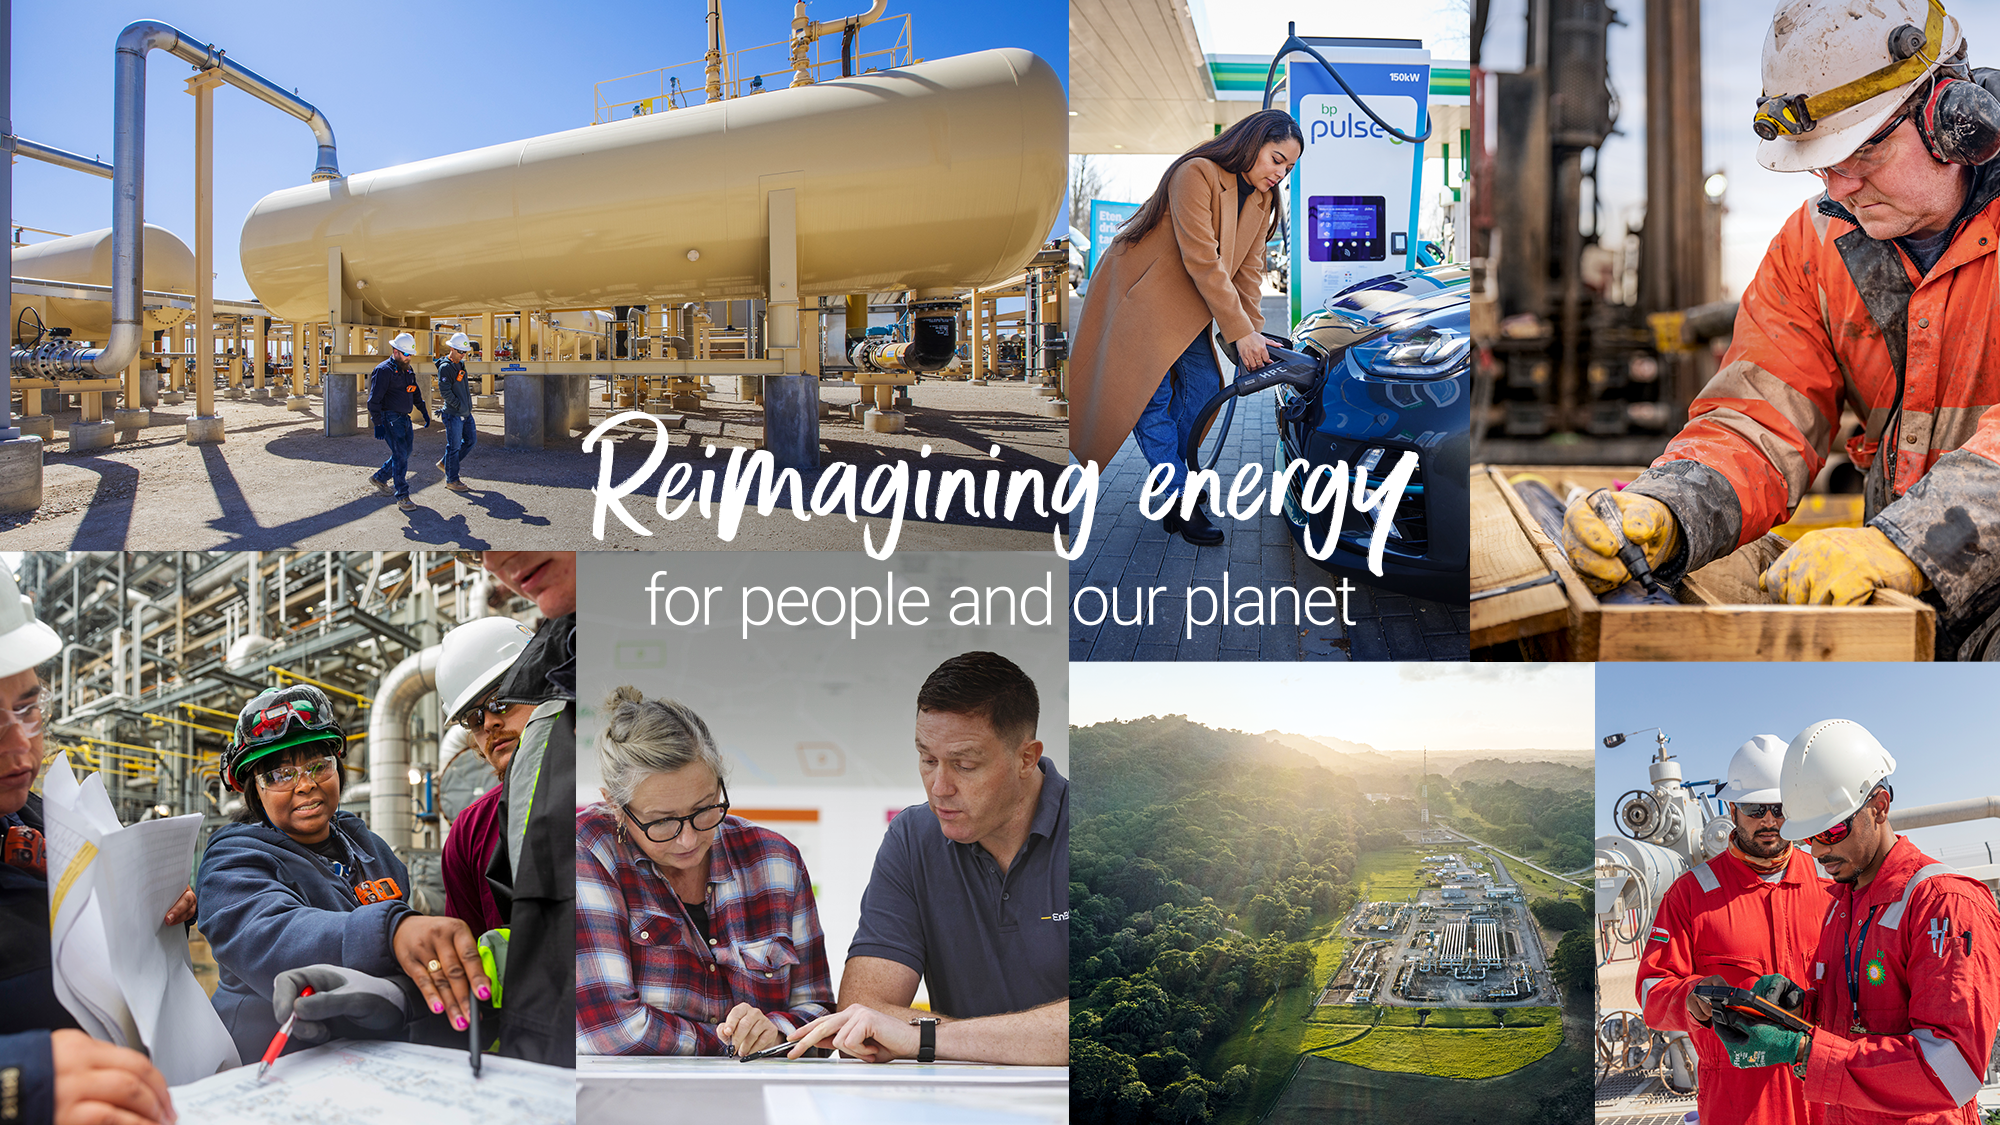 Reimagining energy for people and our planet